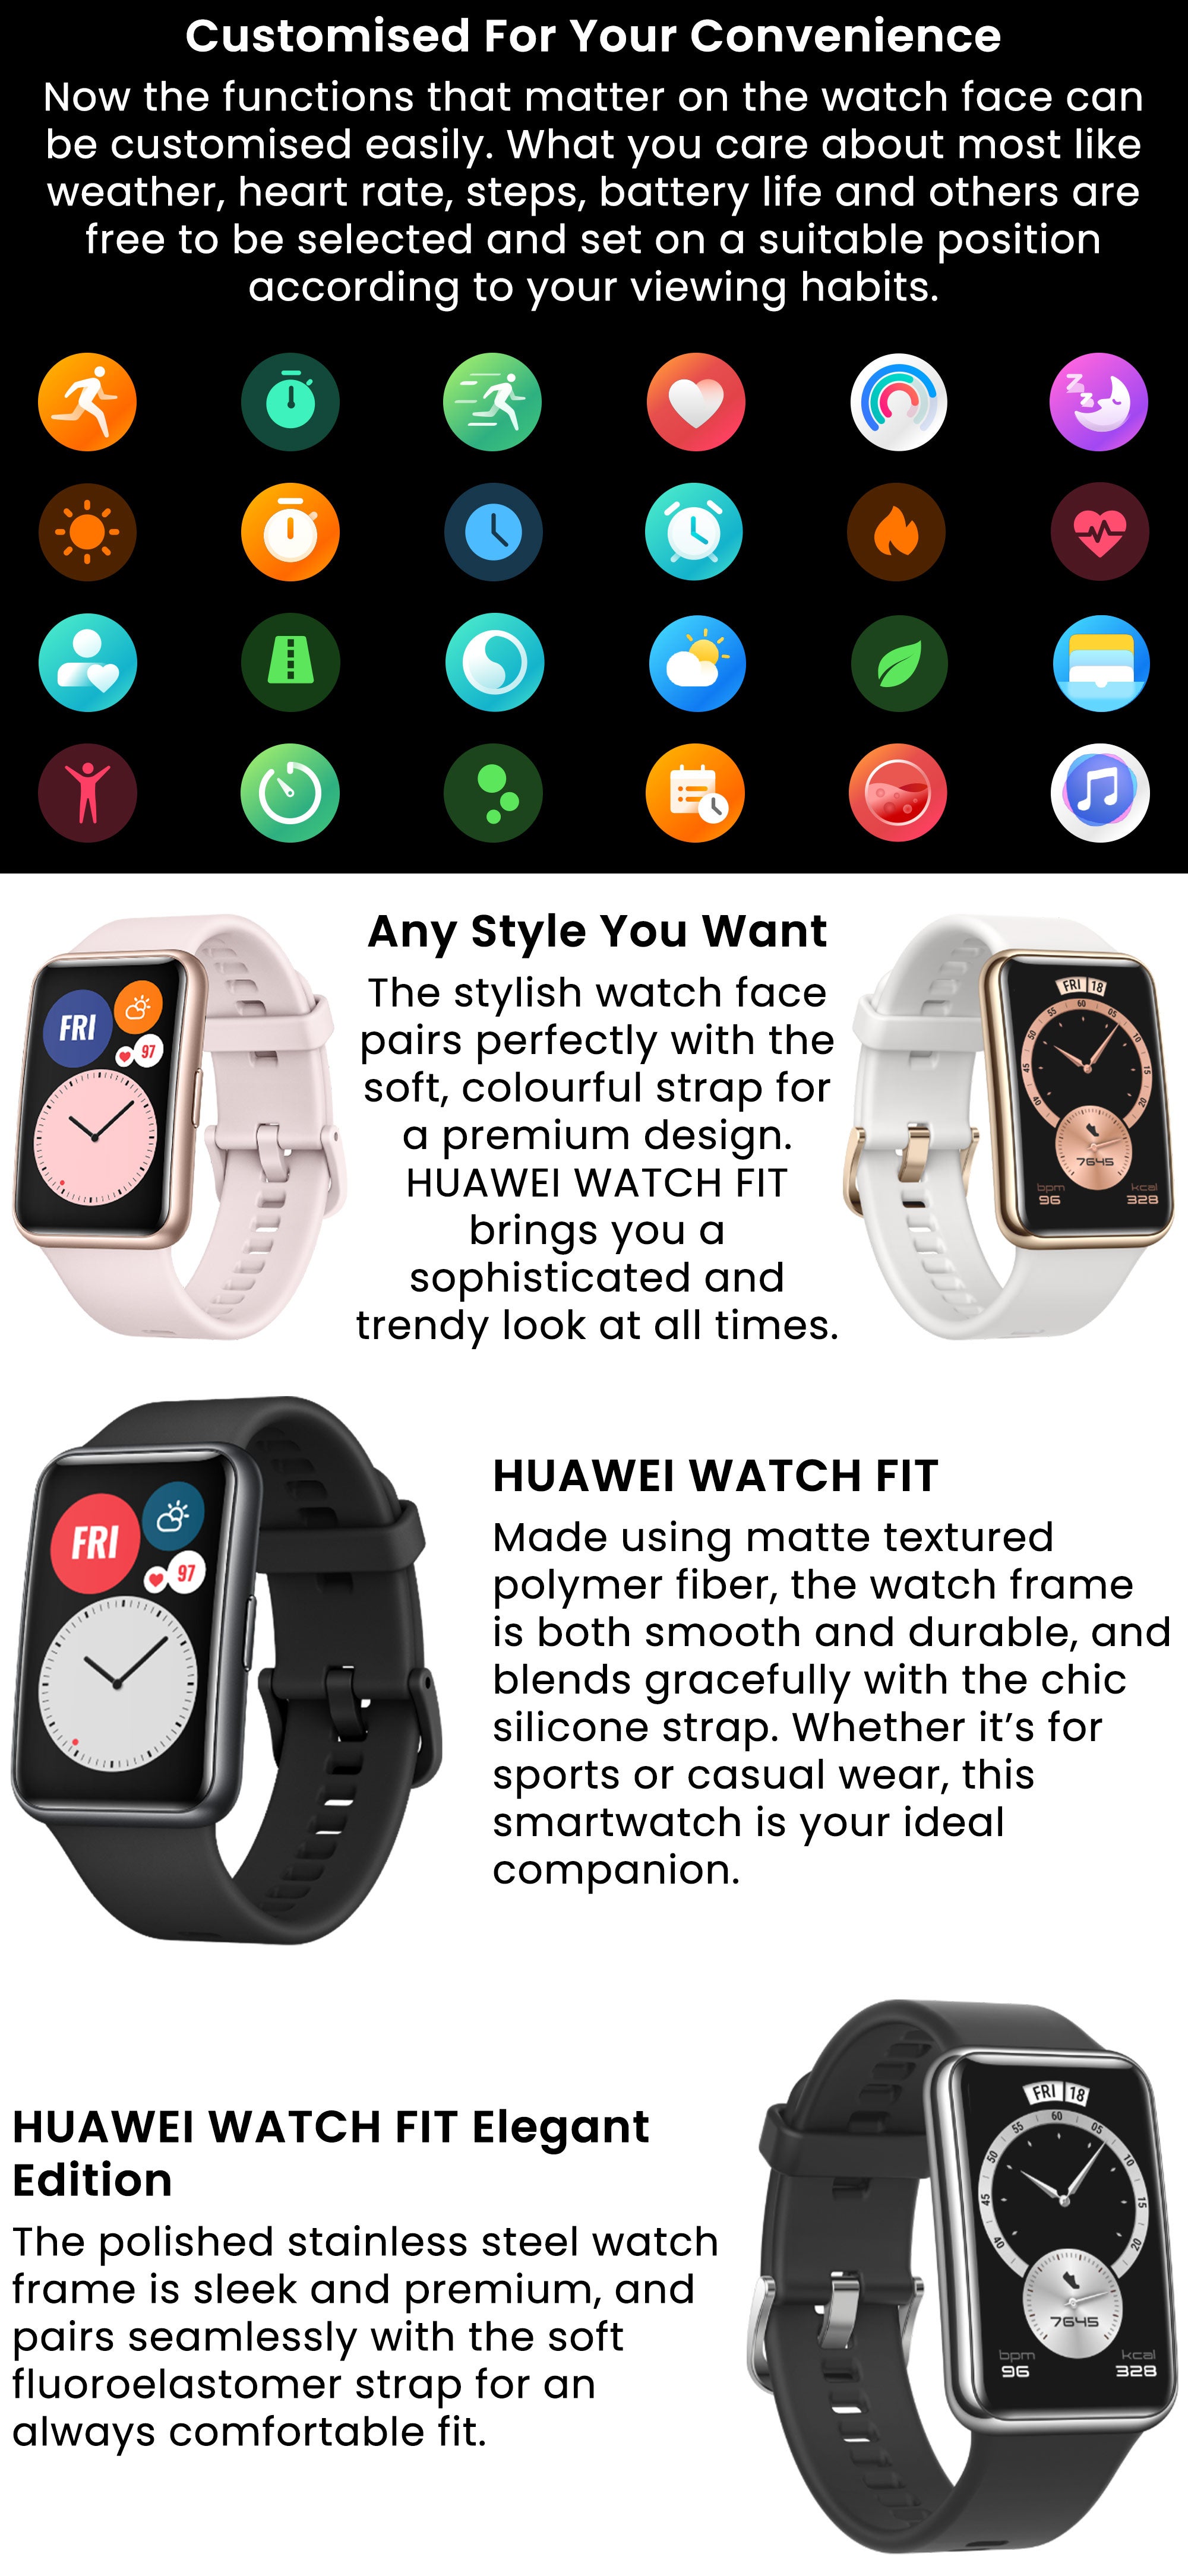 Watch Fit New Smartwatch All-Day SpO2 Monitoring1 Long Battery Life AMOLED Display 1.64inch Sakura pink